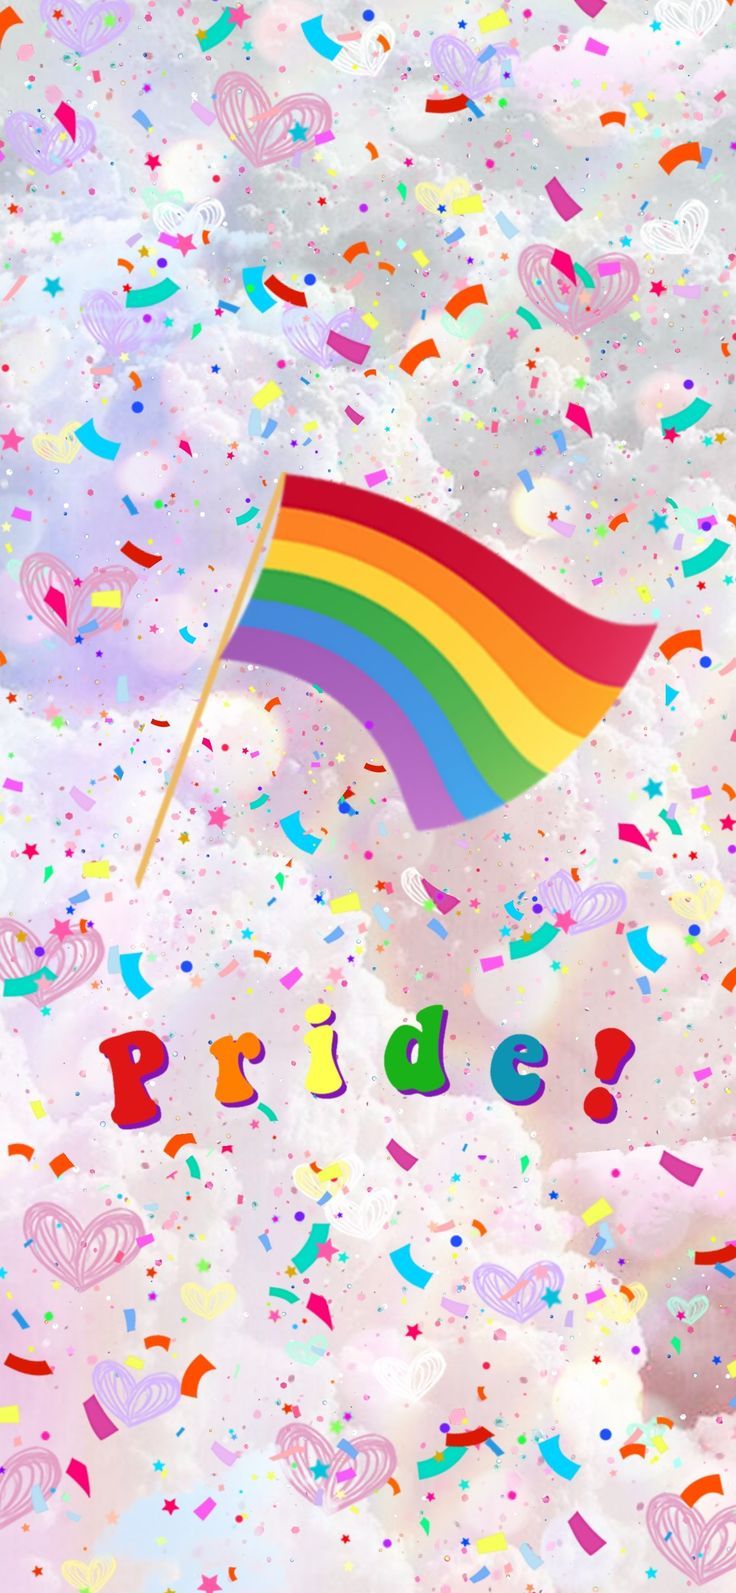 A rainbow flag with confetti and the word pride - Pride, LGBT